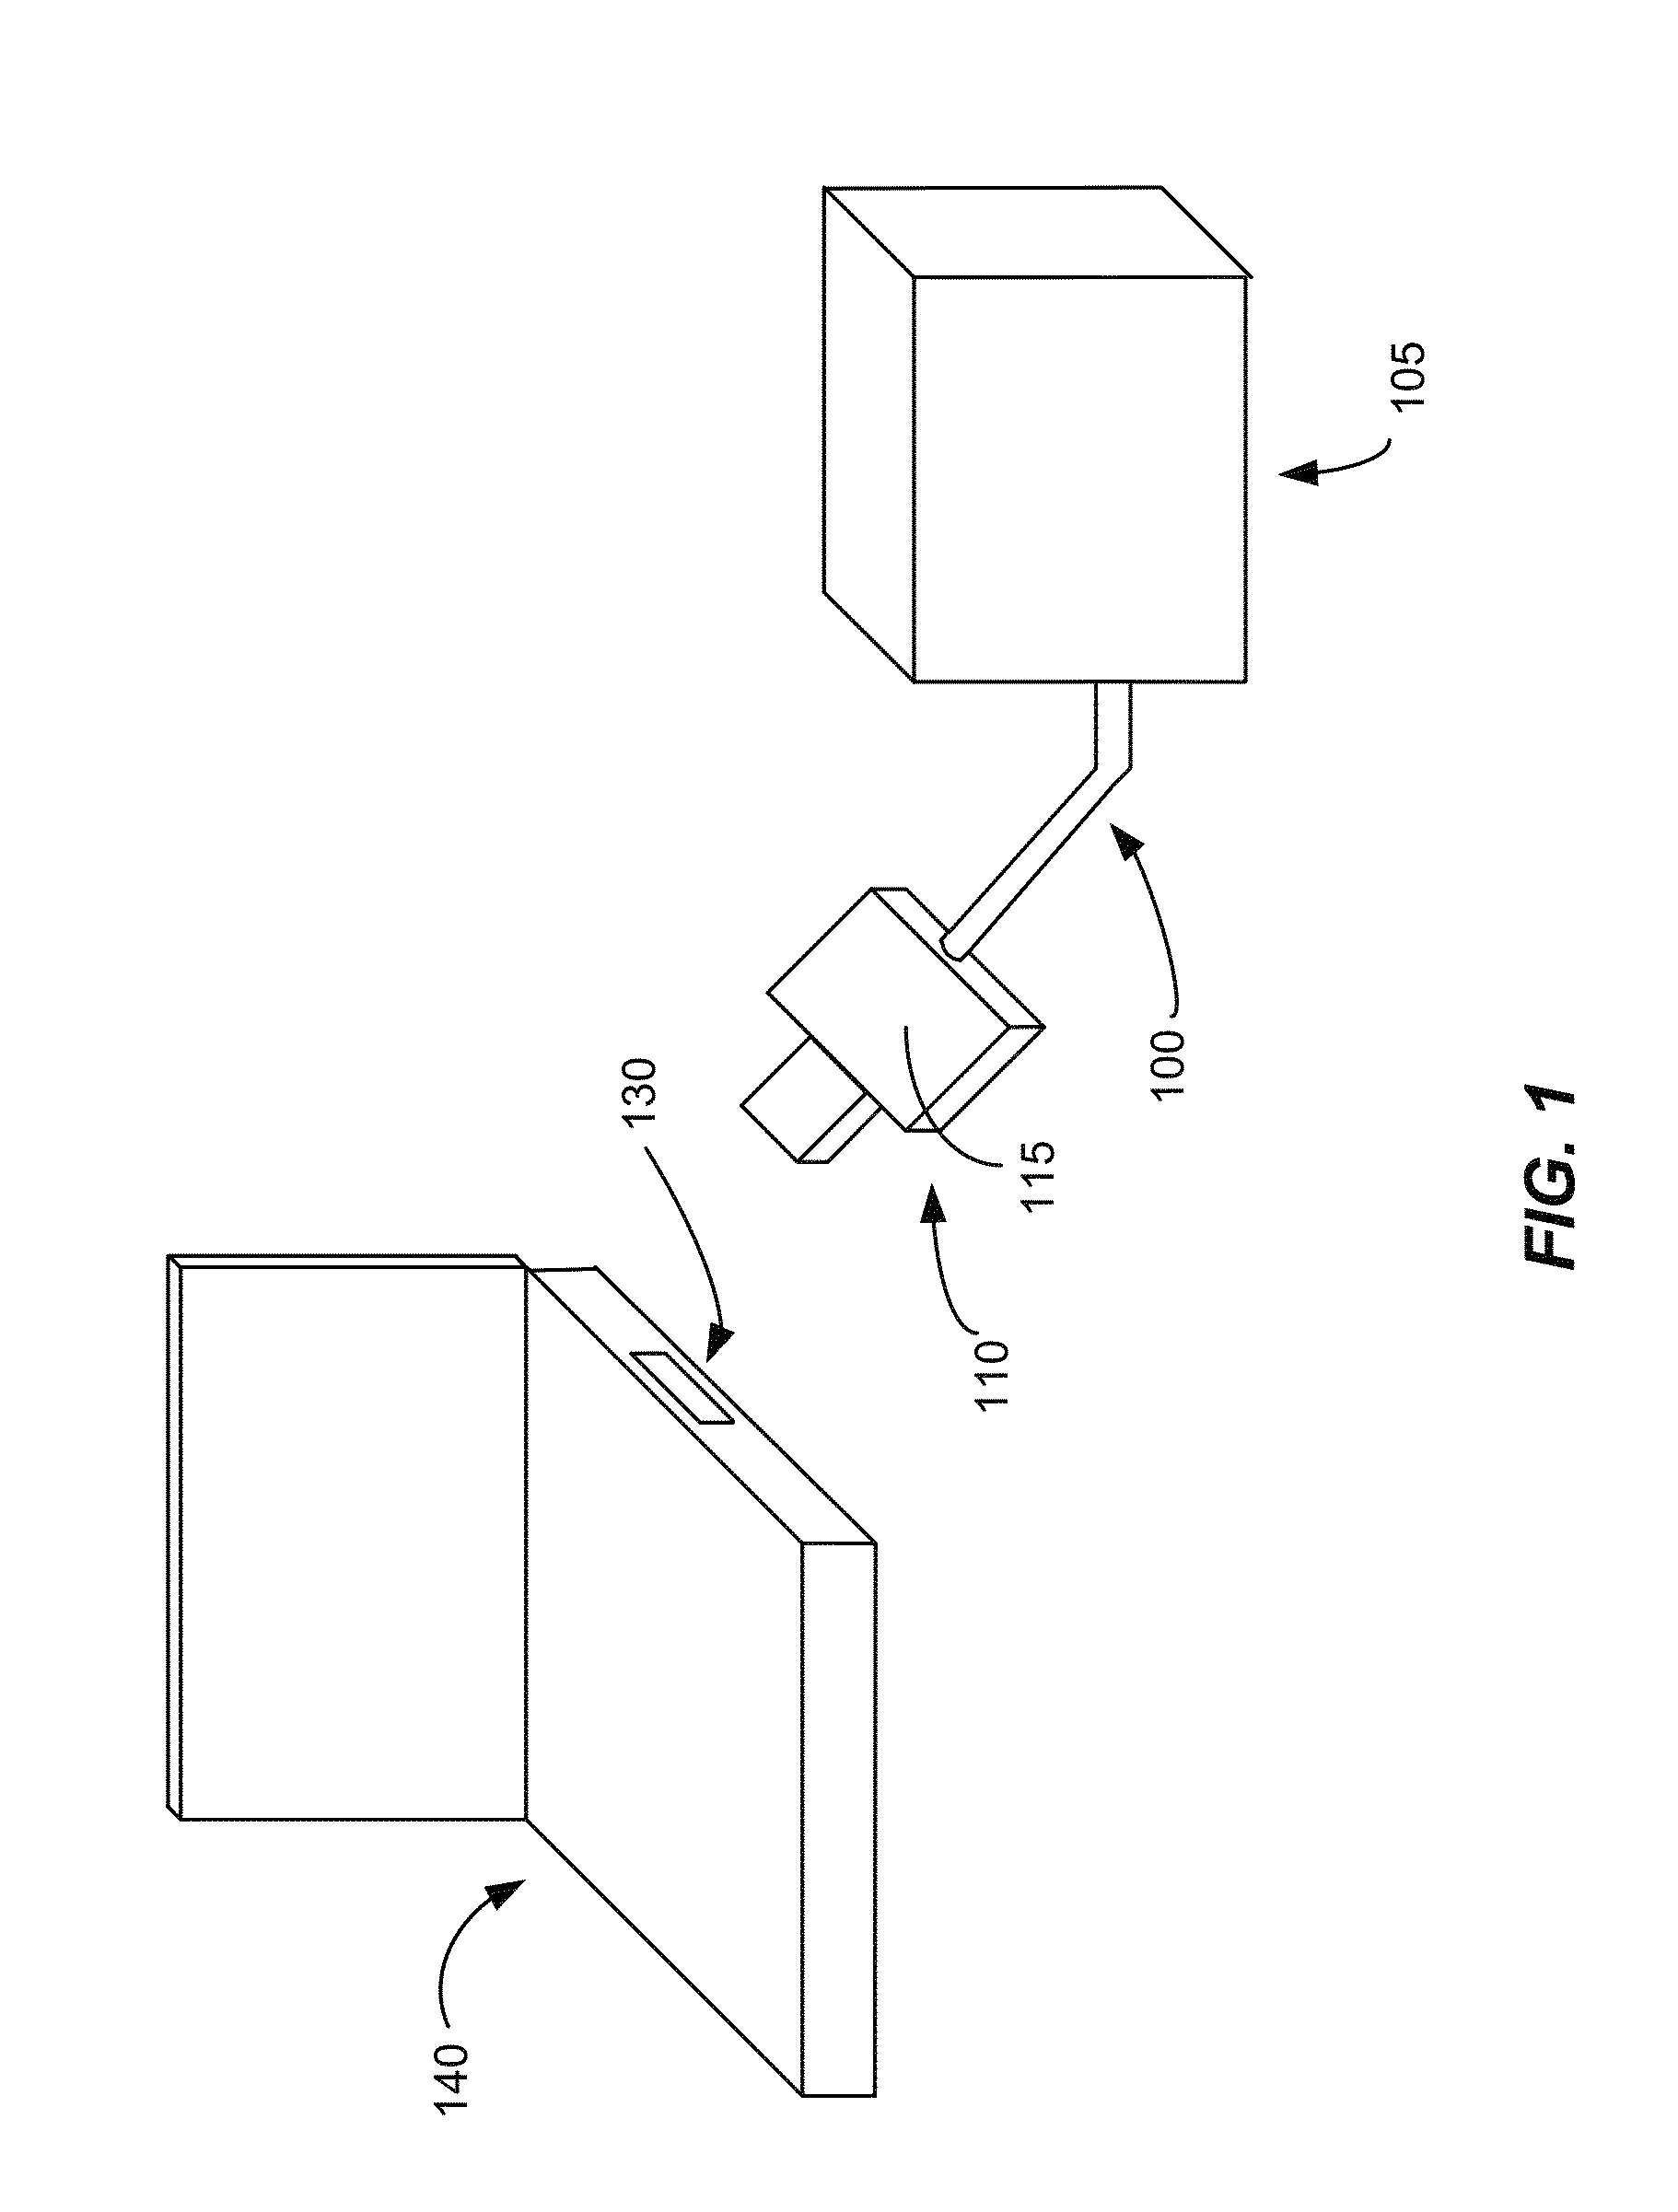 Method for improving connector enclosure adhesion